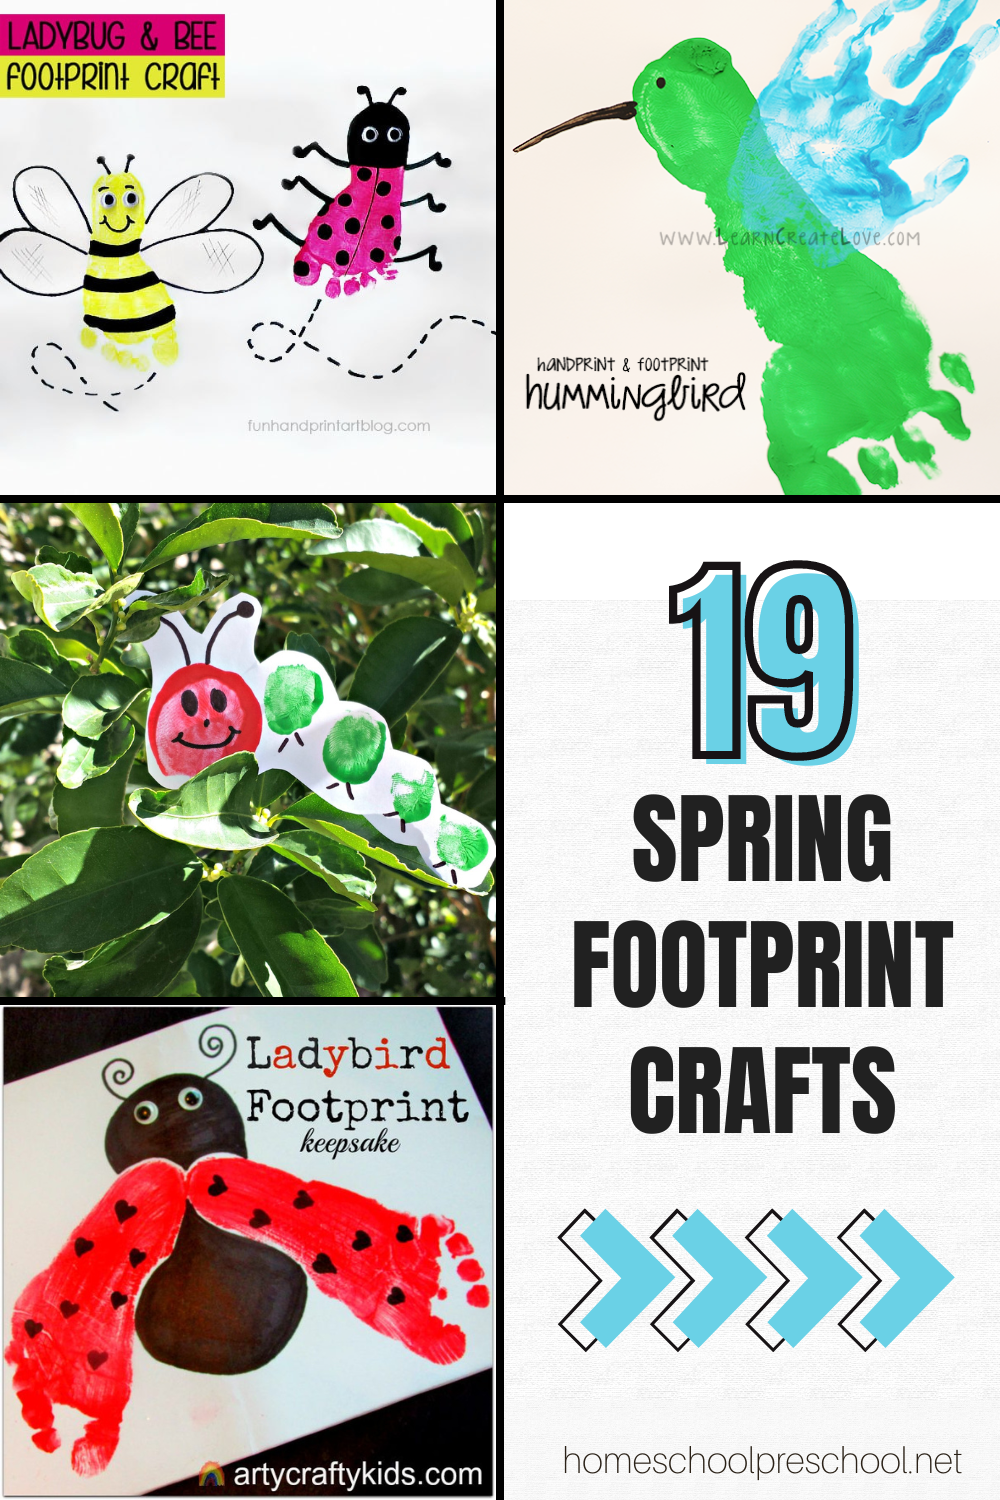 footprint-crafts-for-toddlers Spring Footprint Crafts